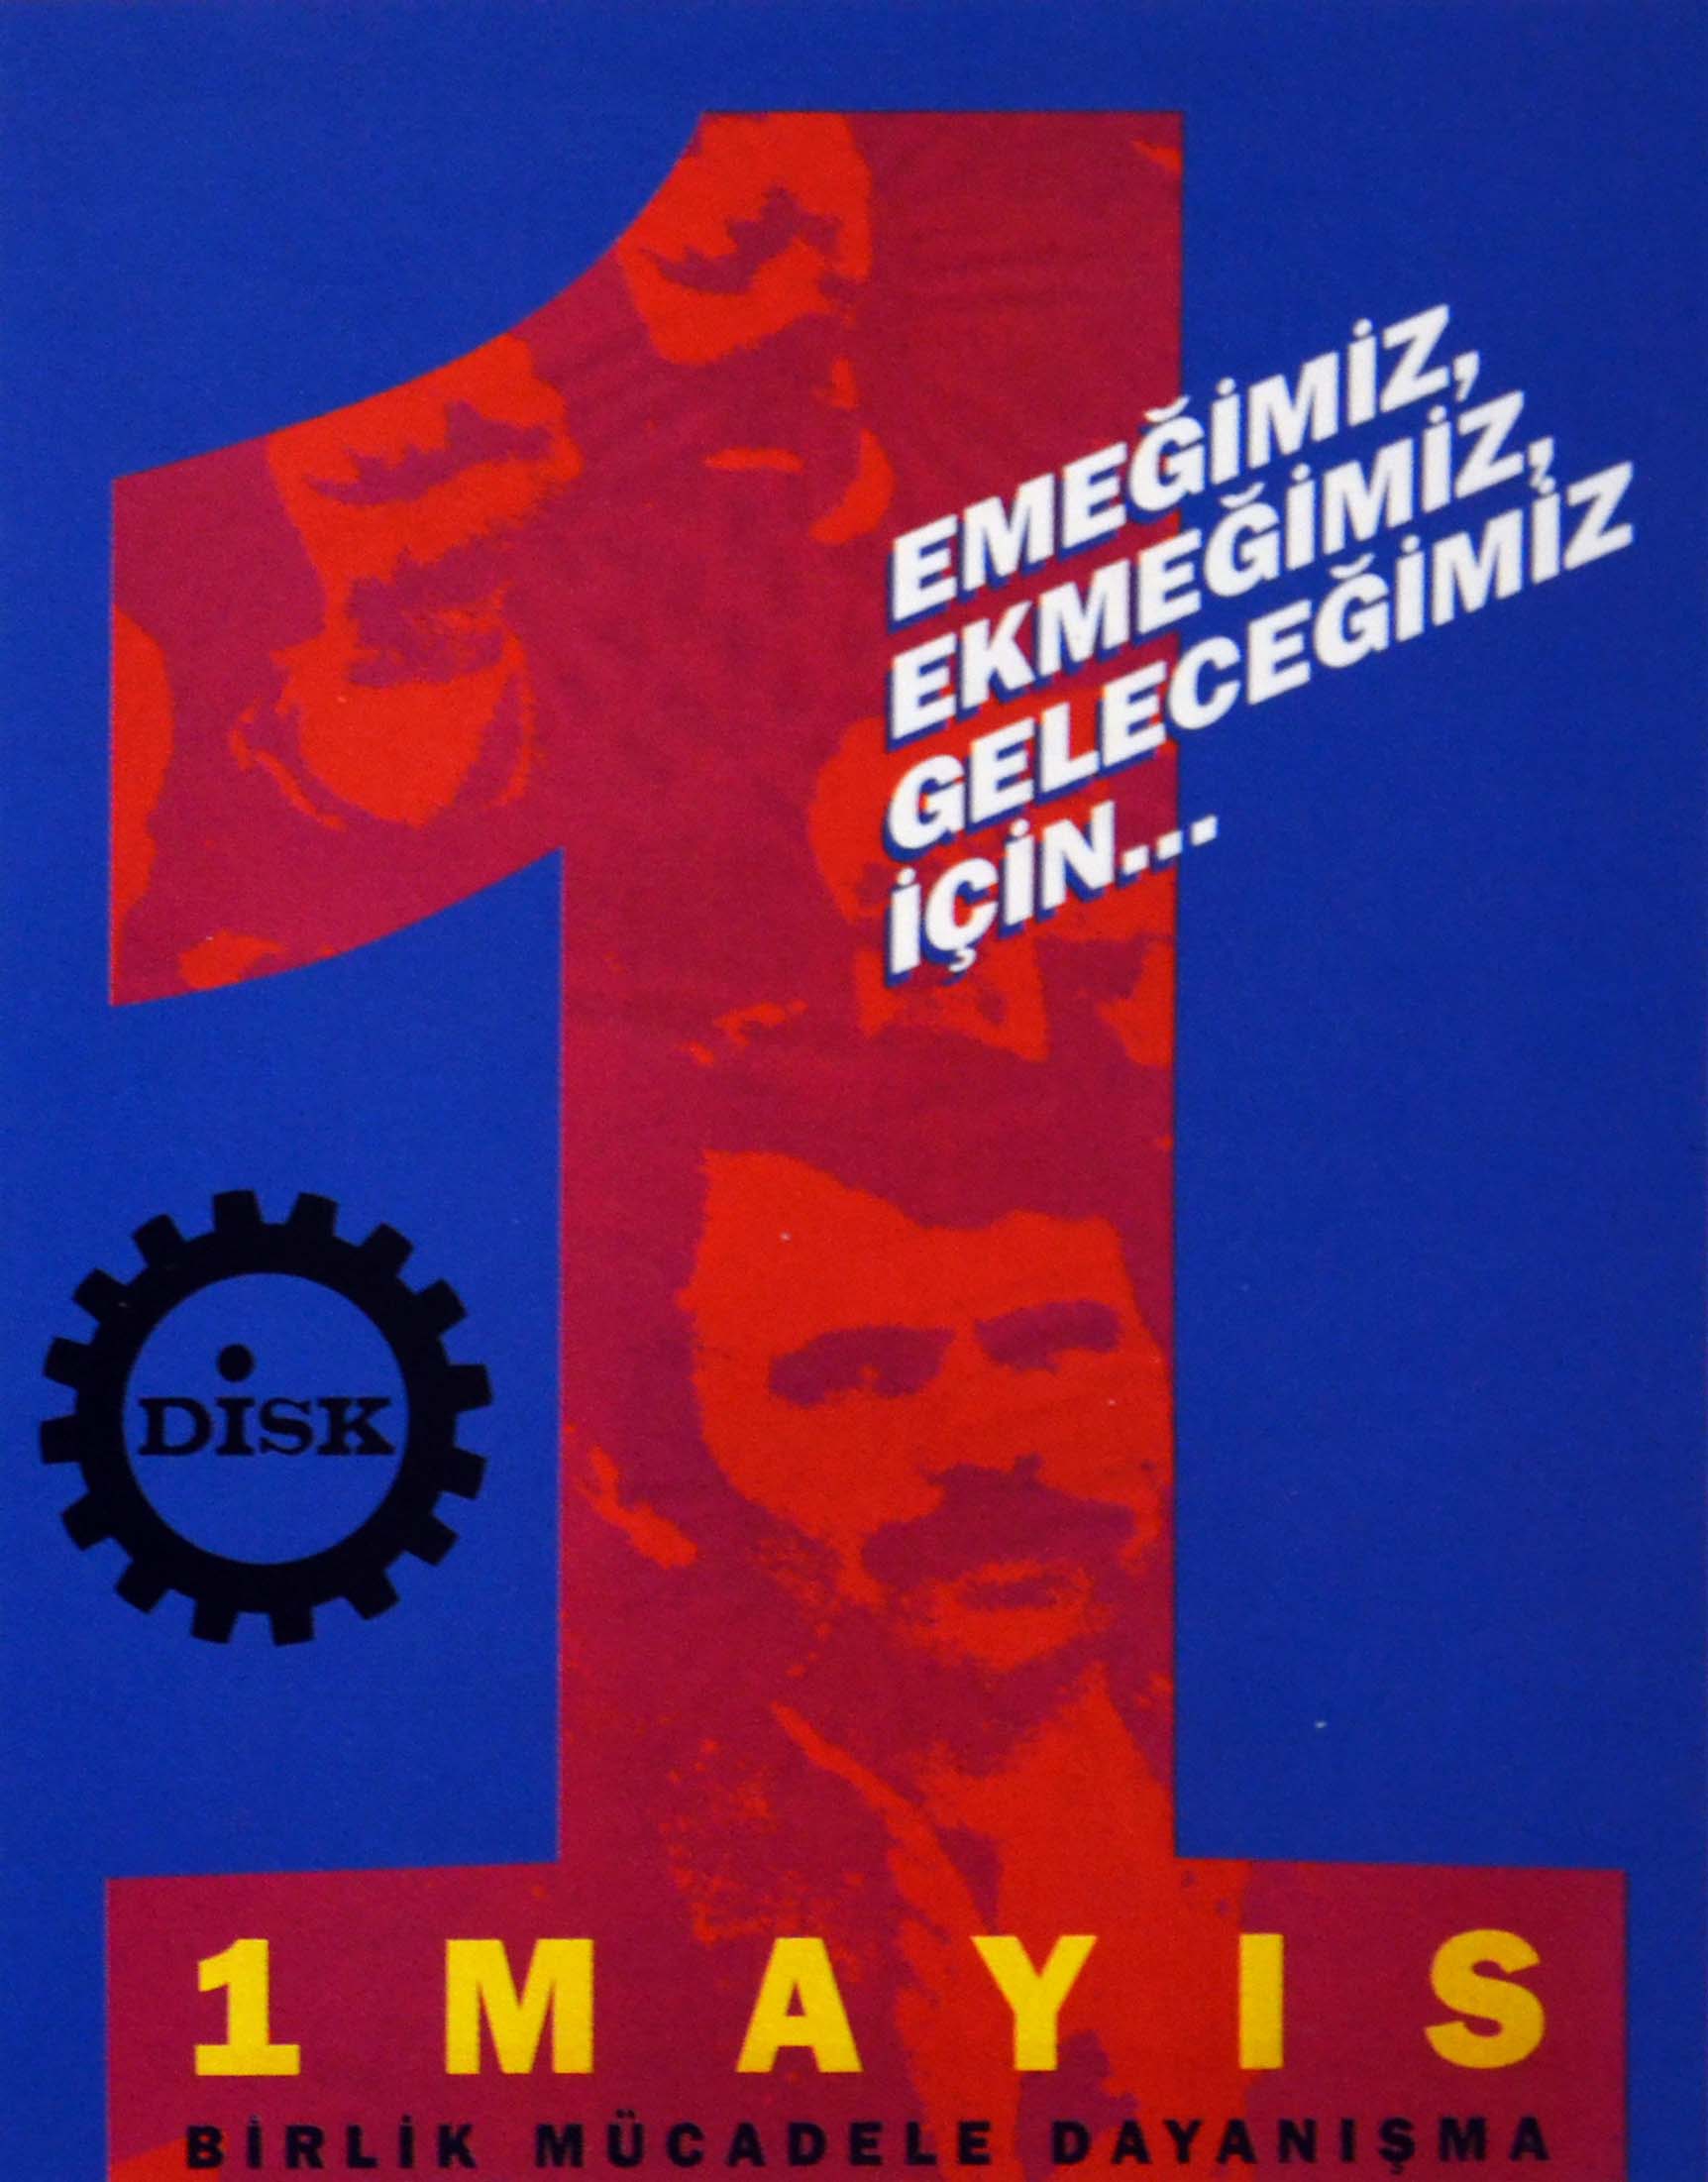 1994 1m DİSK